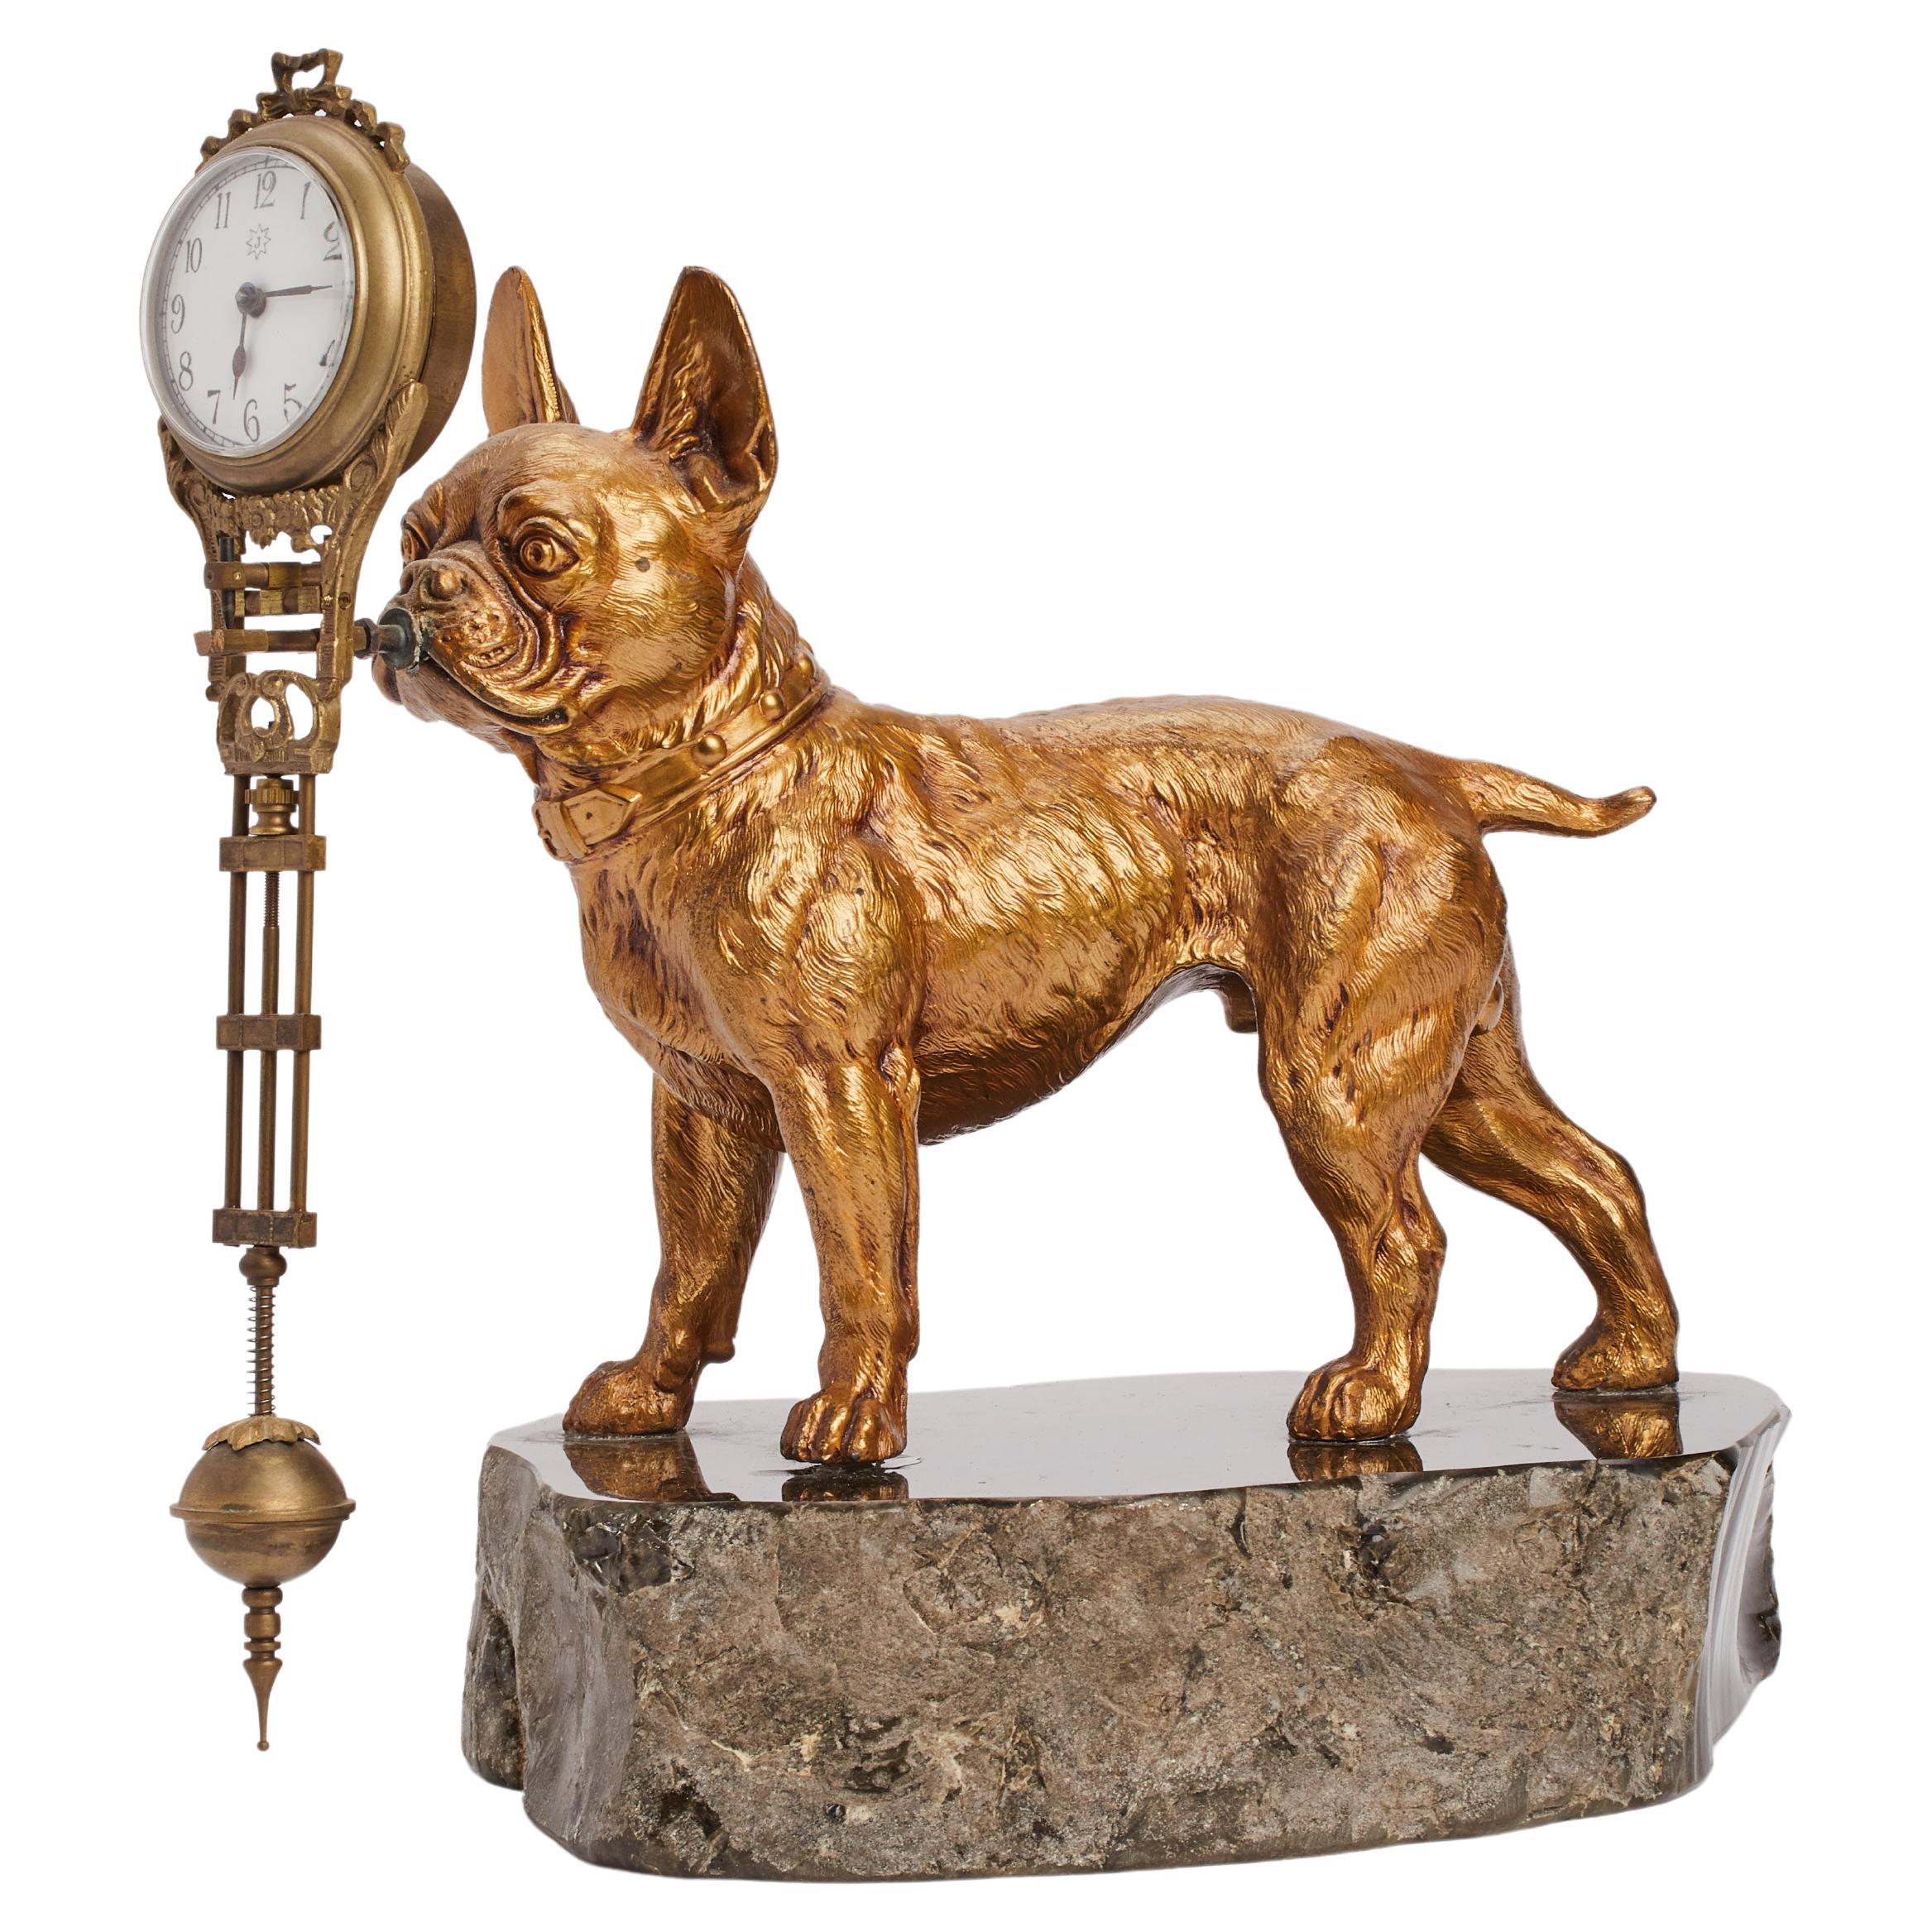 A sculpture depicting a french bulldog holding a pendulum clock, France 1900. For Sale